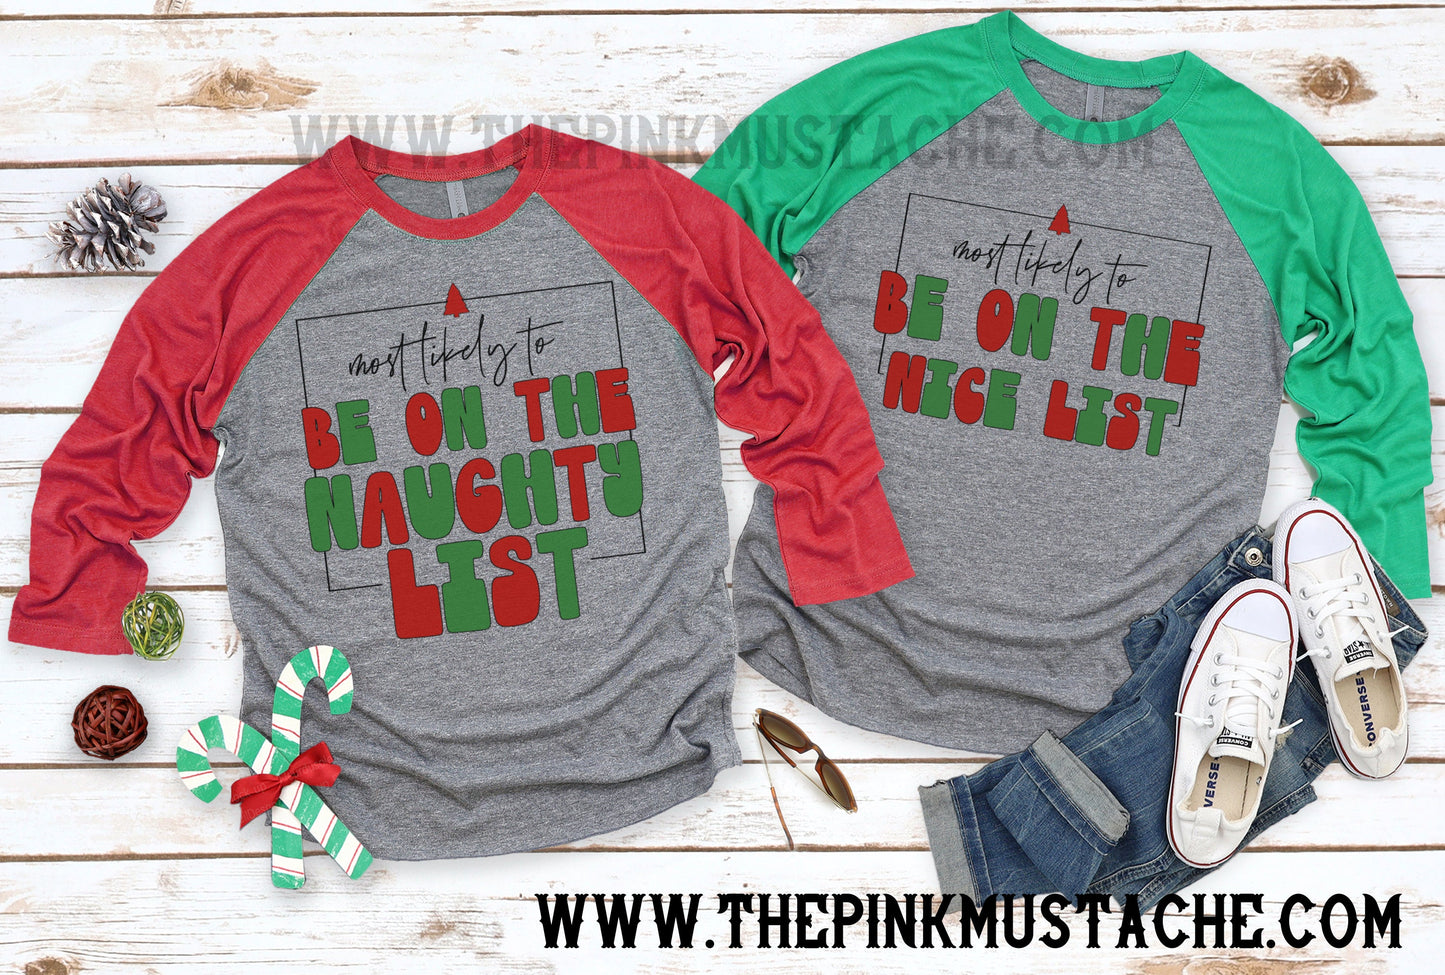 Most Likely To Be On The Nice List/ Likely to be On The Naughty List - Funny Matching Shirts / Couple Matching Tees / Raglans / Friend Christmas Shirt